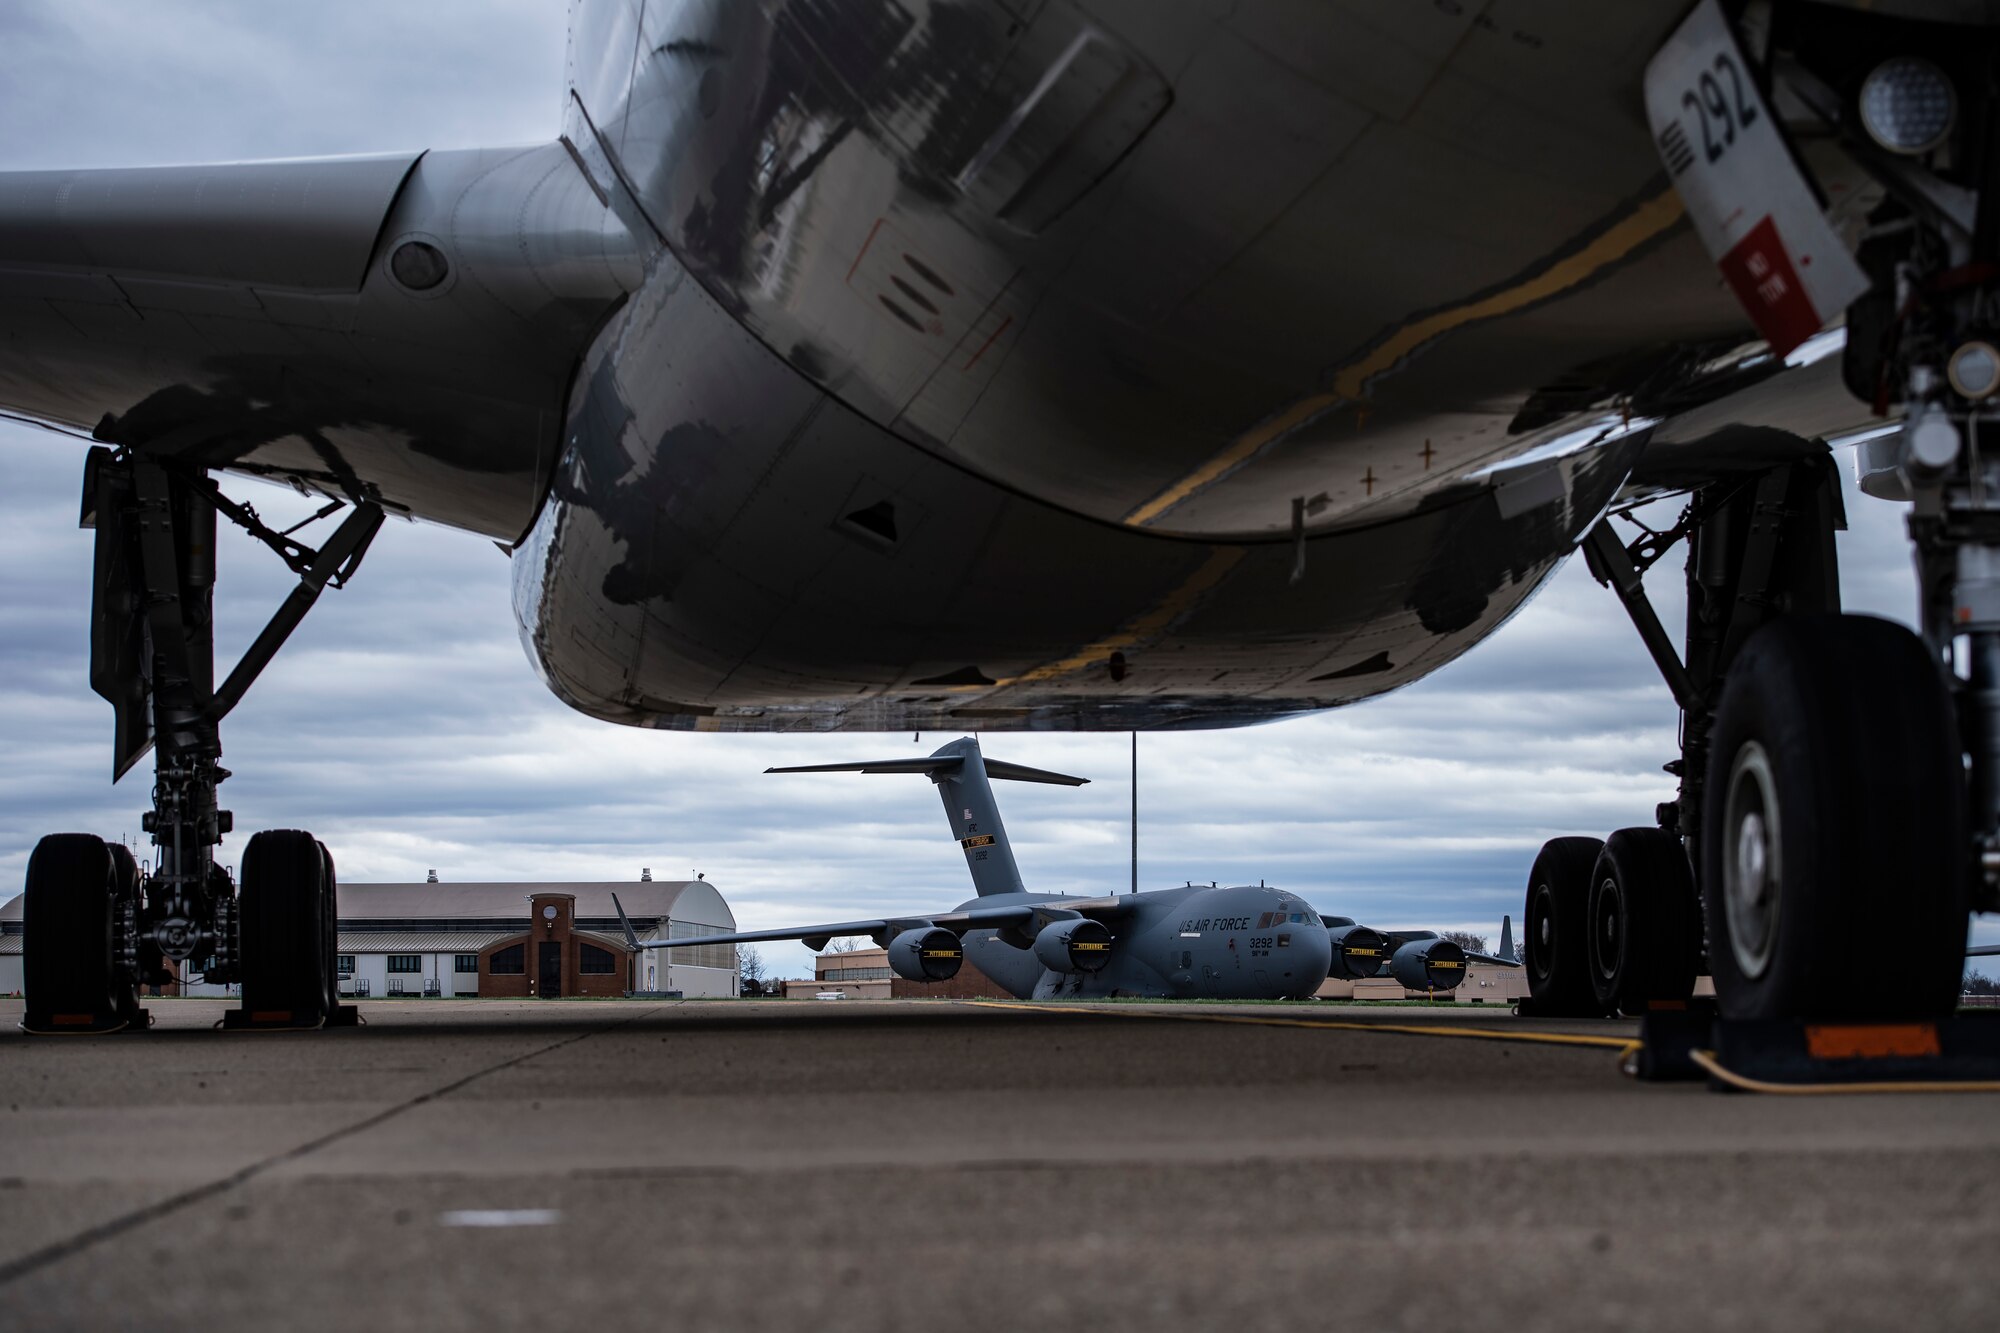 C-17 Globemaster III assigned to the 911th Airlift Wing sit on the flightline behind grounded commercial aircraft at the Pittsburgh International Airport Air Reserve Station, Pennsylvania, March 30, 2020.